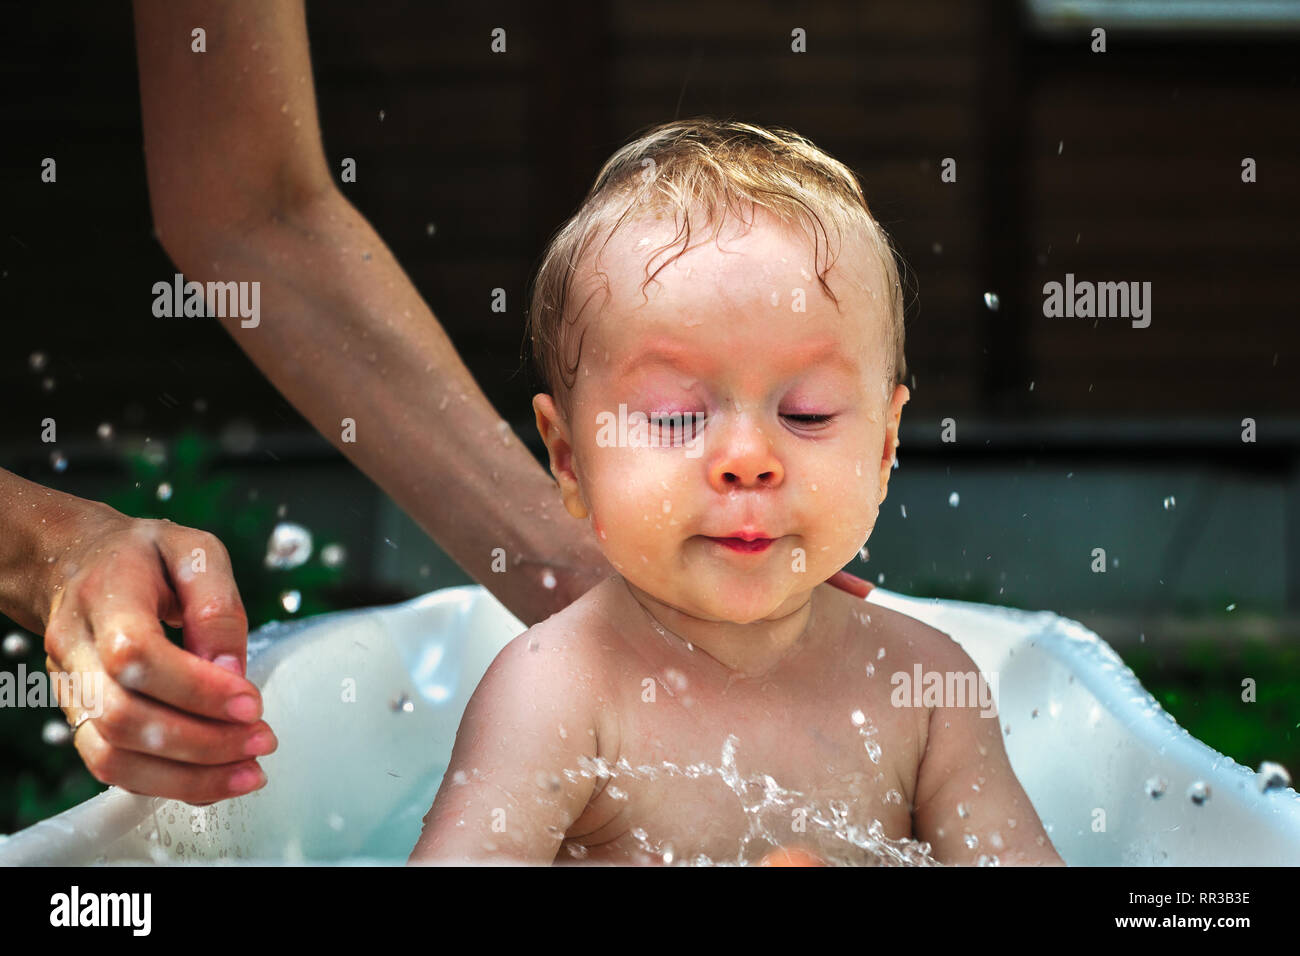 Child in harmony with nature playing fun with water and taking bath outdoors on the grass in bowl in the village Stock Photo